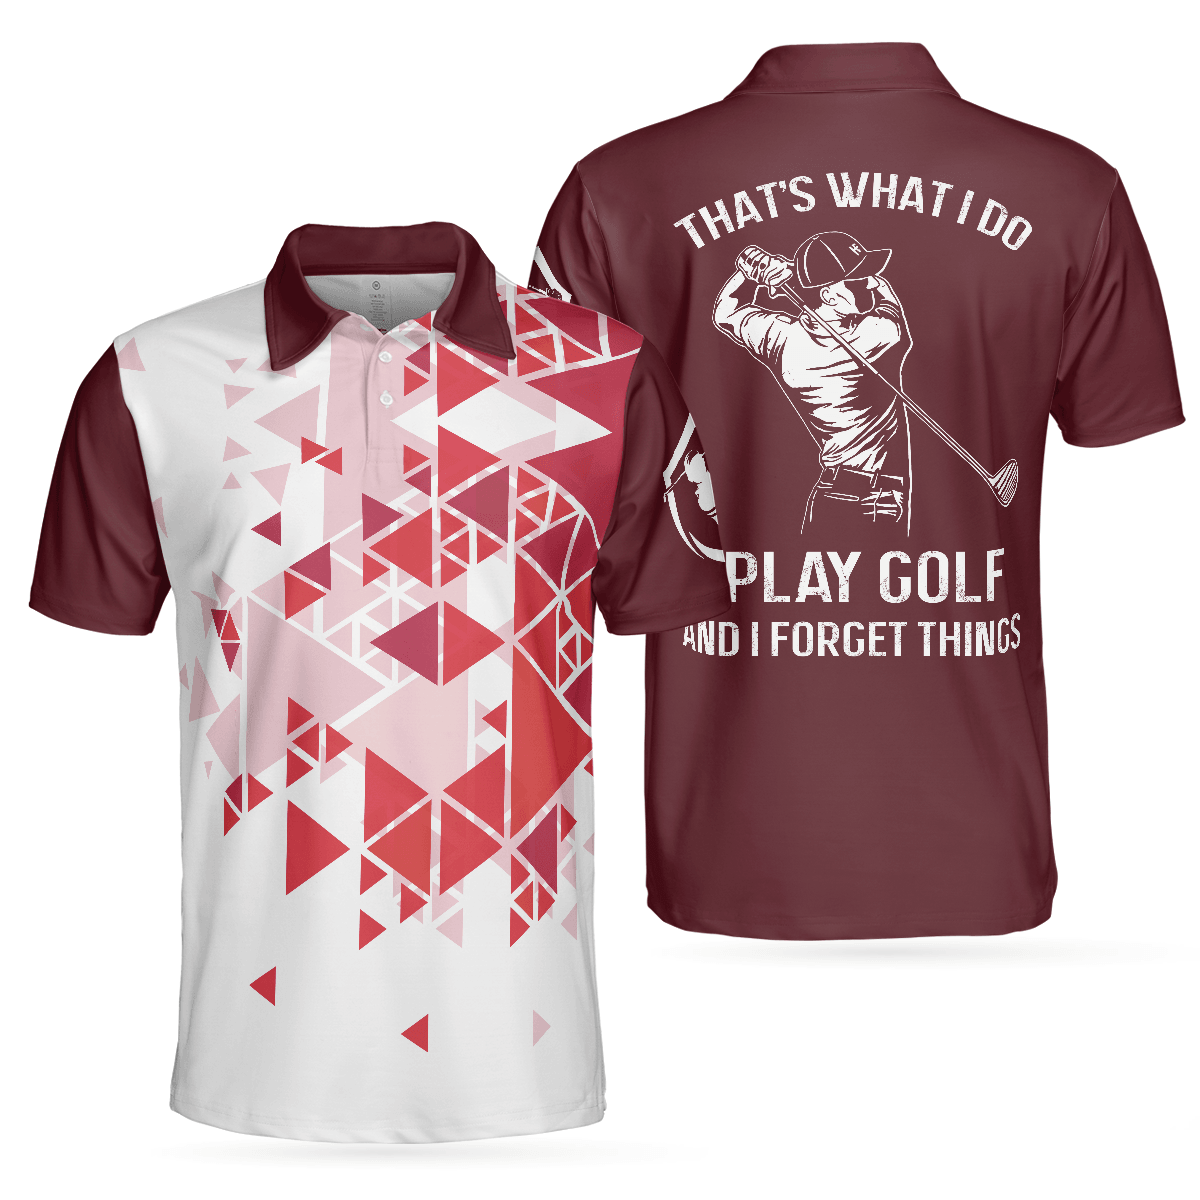 Golf Men Polo Shirt, Red Golfing Shirt Design With Sayings, Best Gift For Golfers, That's What I Do Play Golf - Perfect Gift For Men, Golfers - Amzanimalsgift